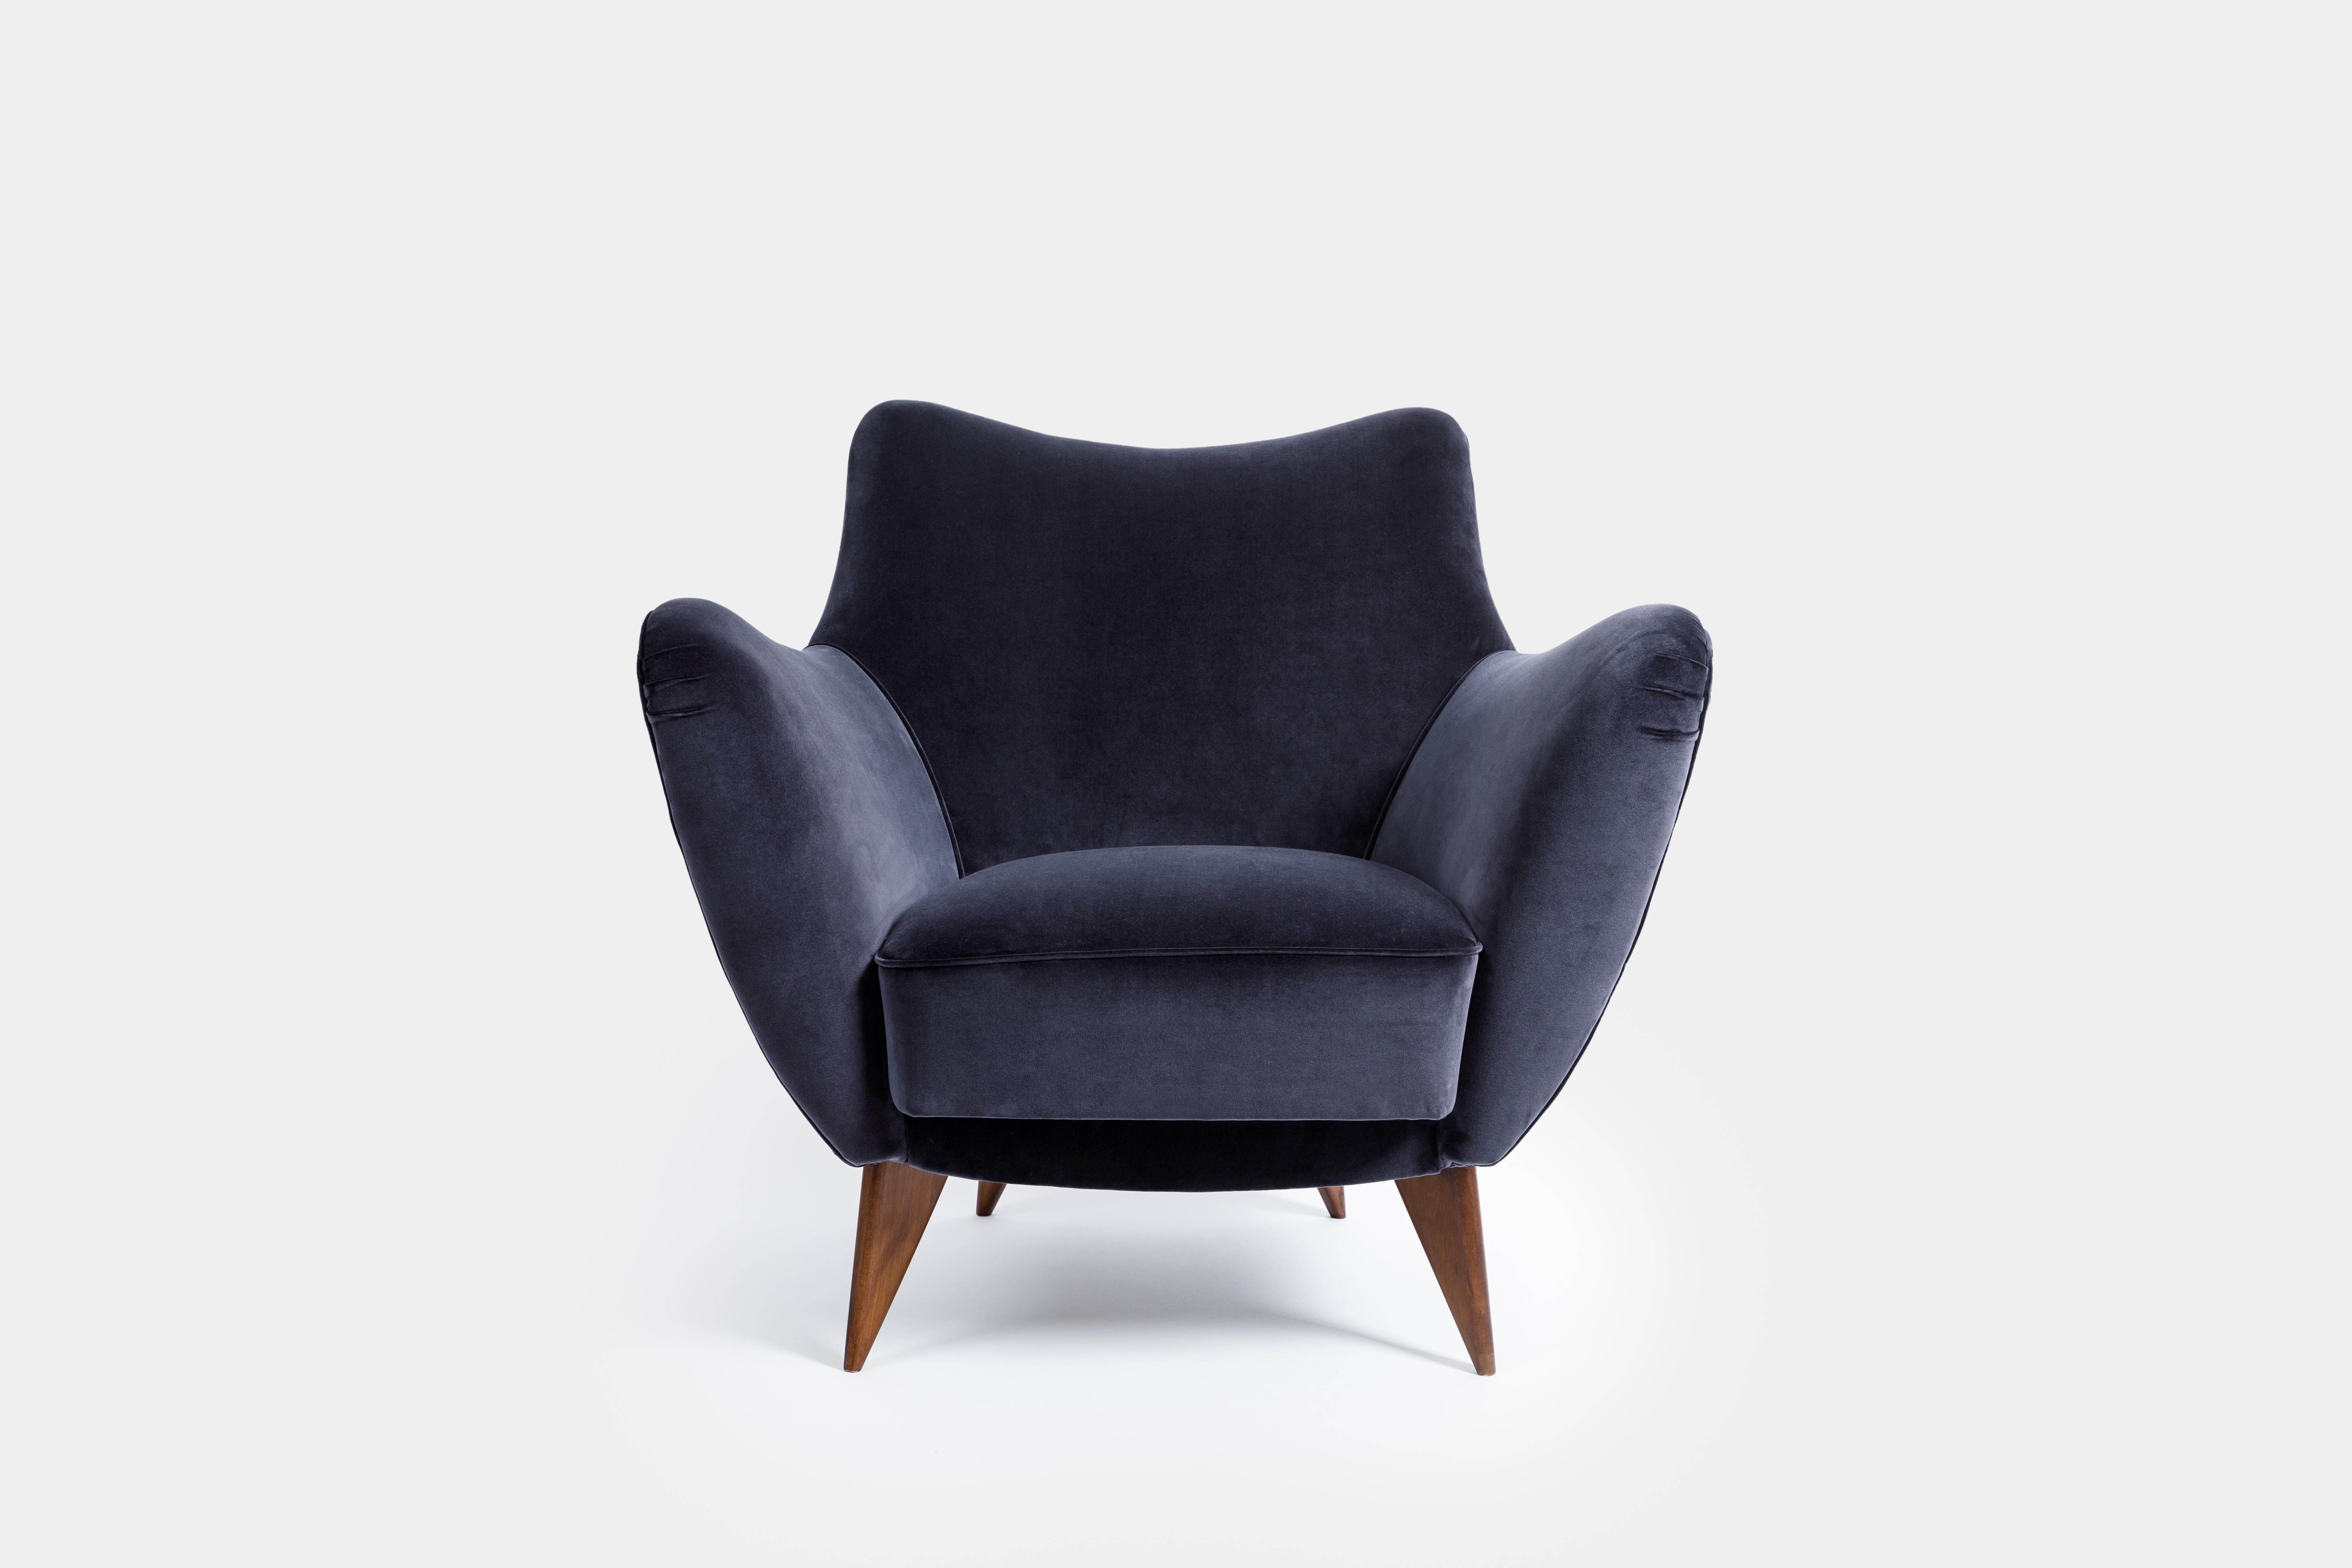 Sculptural and elegant 'Perla' armchair by Guglielmo Veronesi for ISA Bergamo. Slightly curved back with gently outstretched arms ending in distinctly tapered legs. Fully restored and reupholstered in navy velvet upholstery.

Literature:
Domus,